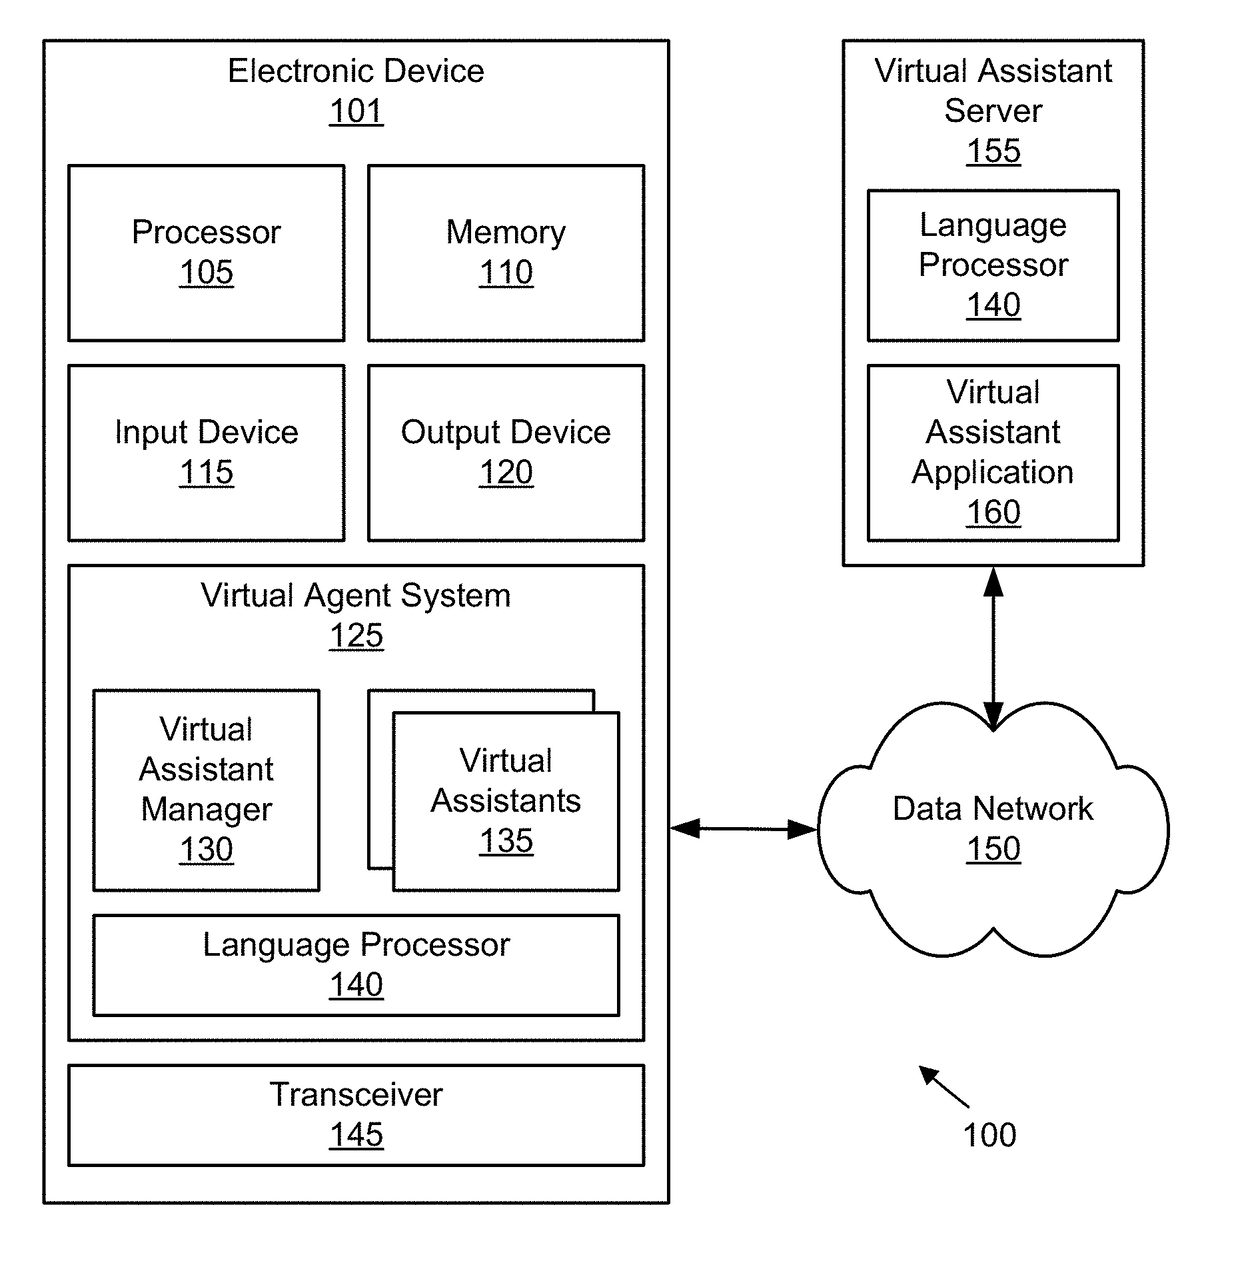 Indicating a responding virtual assistant from a plurality of virtual assistants